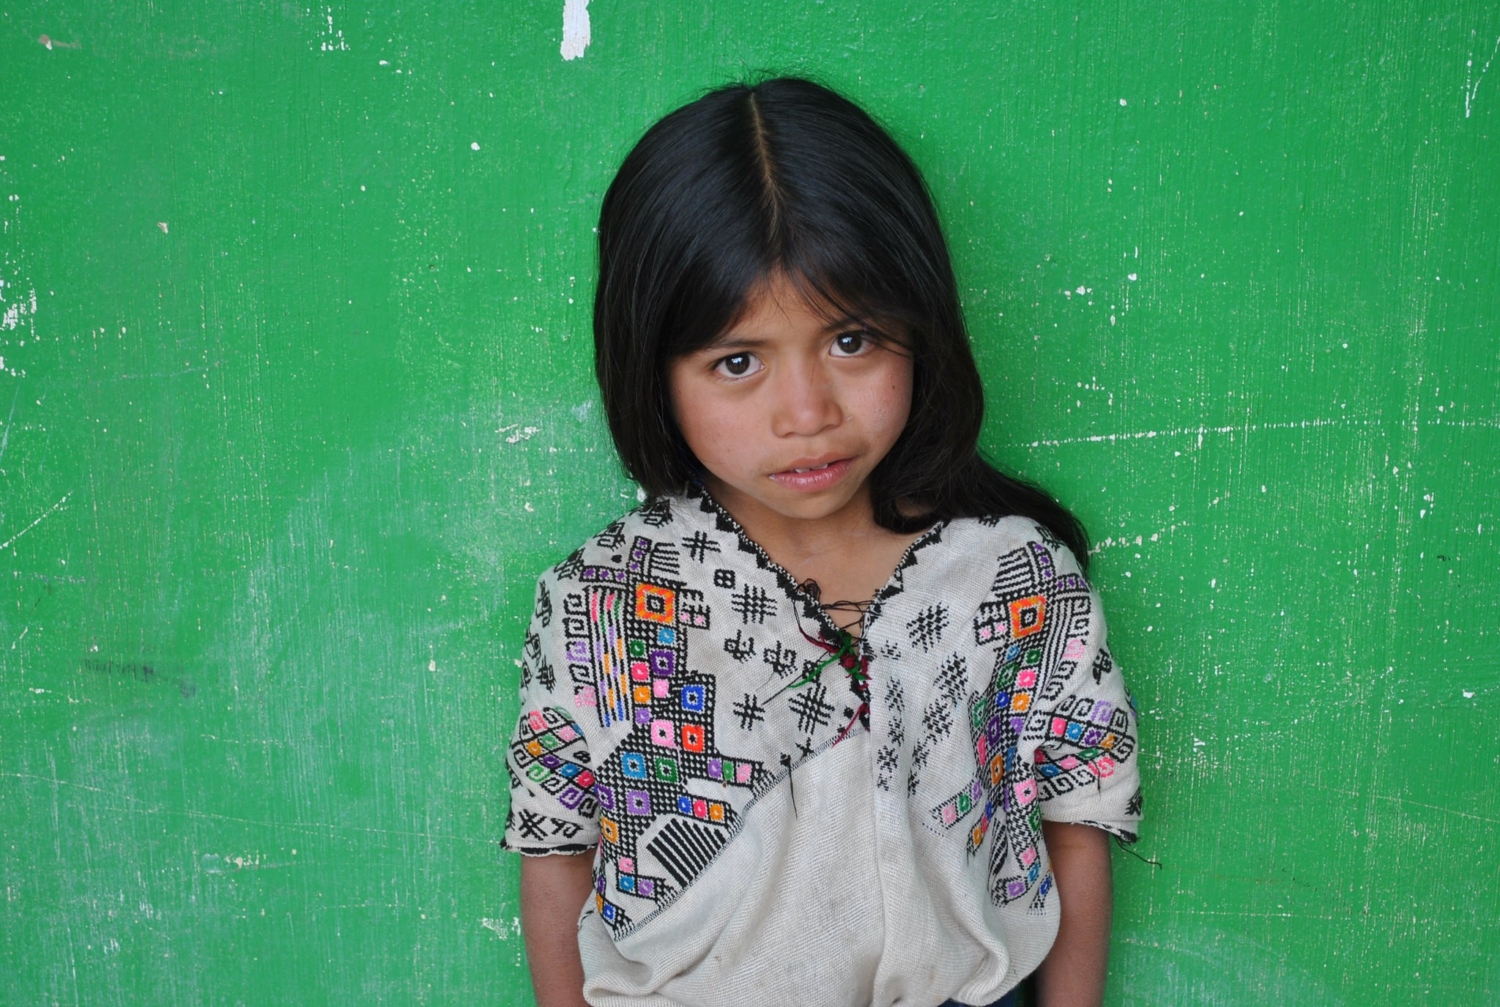 Child Trafficking. Image of an indigenous child staring at the camera. 